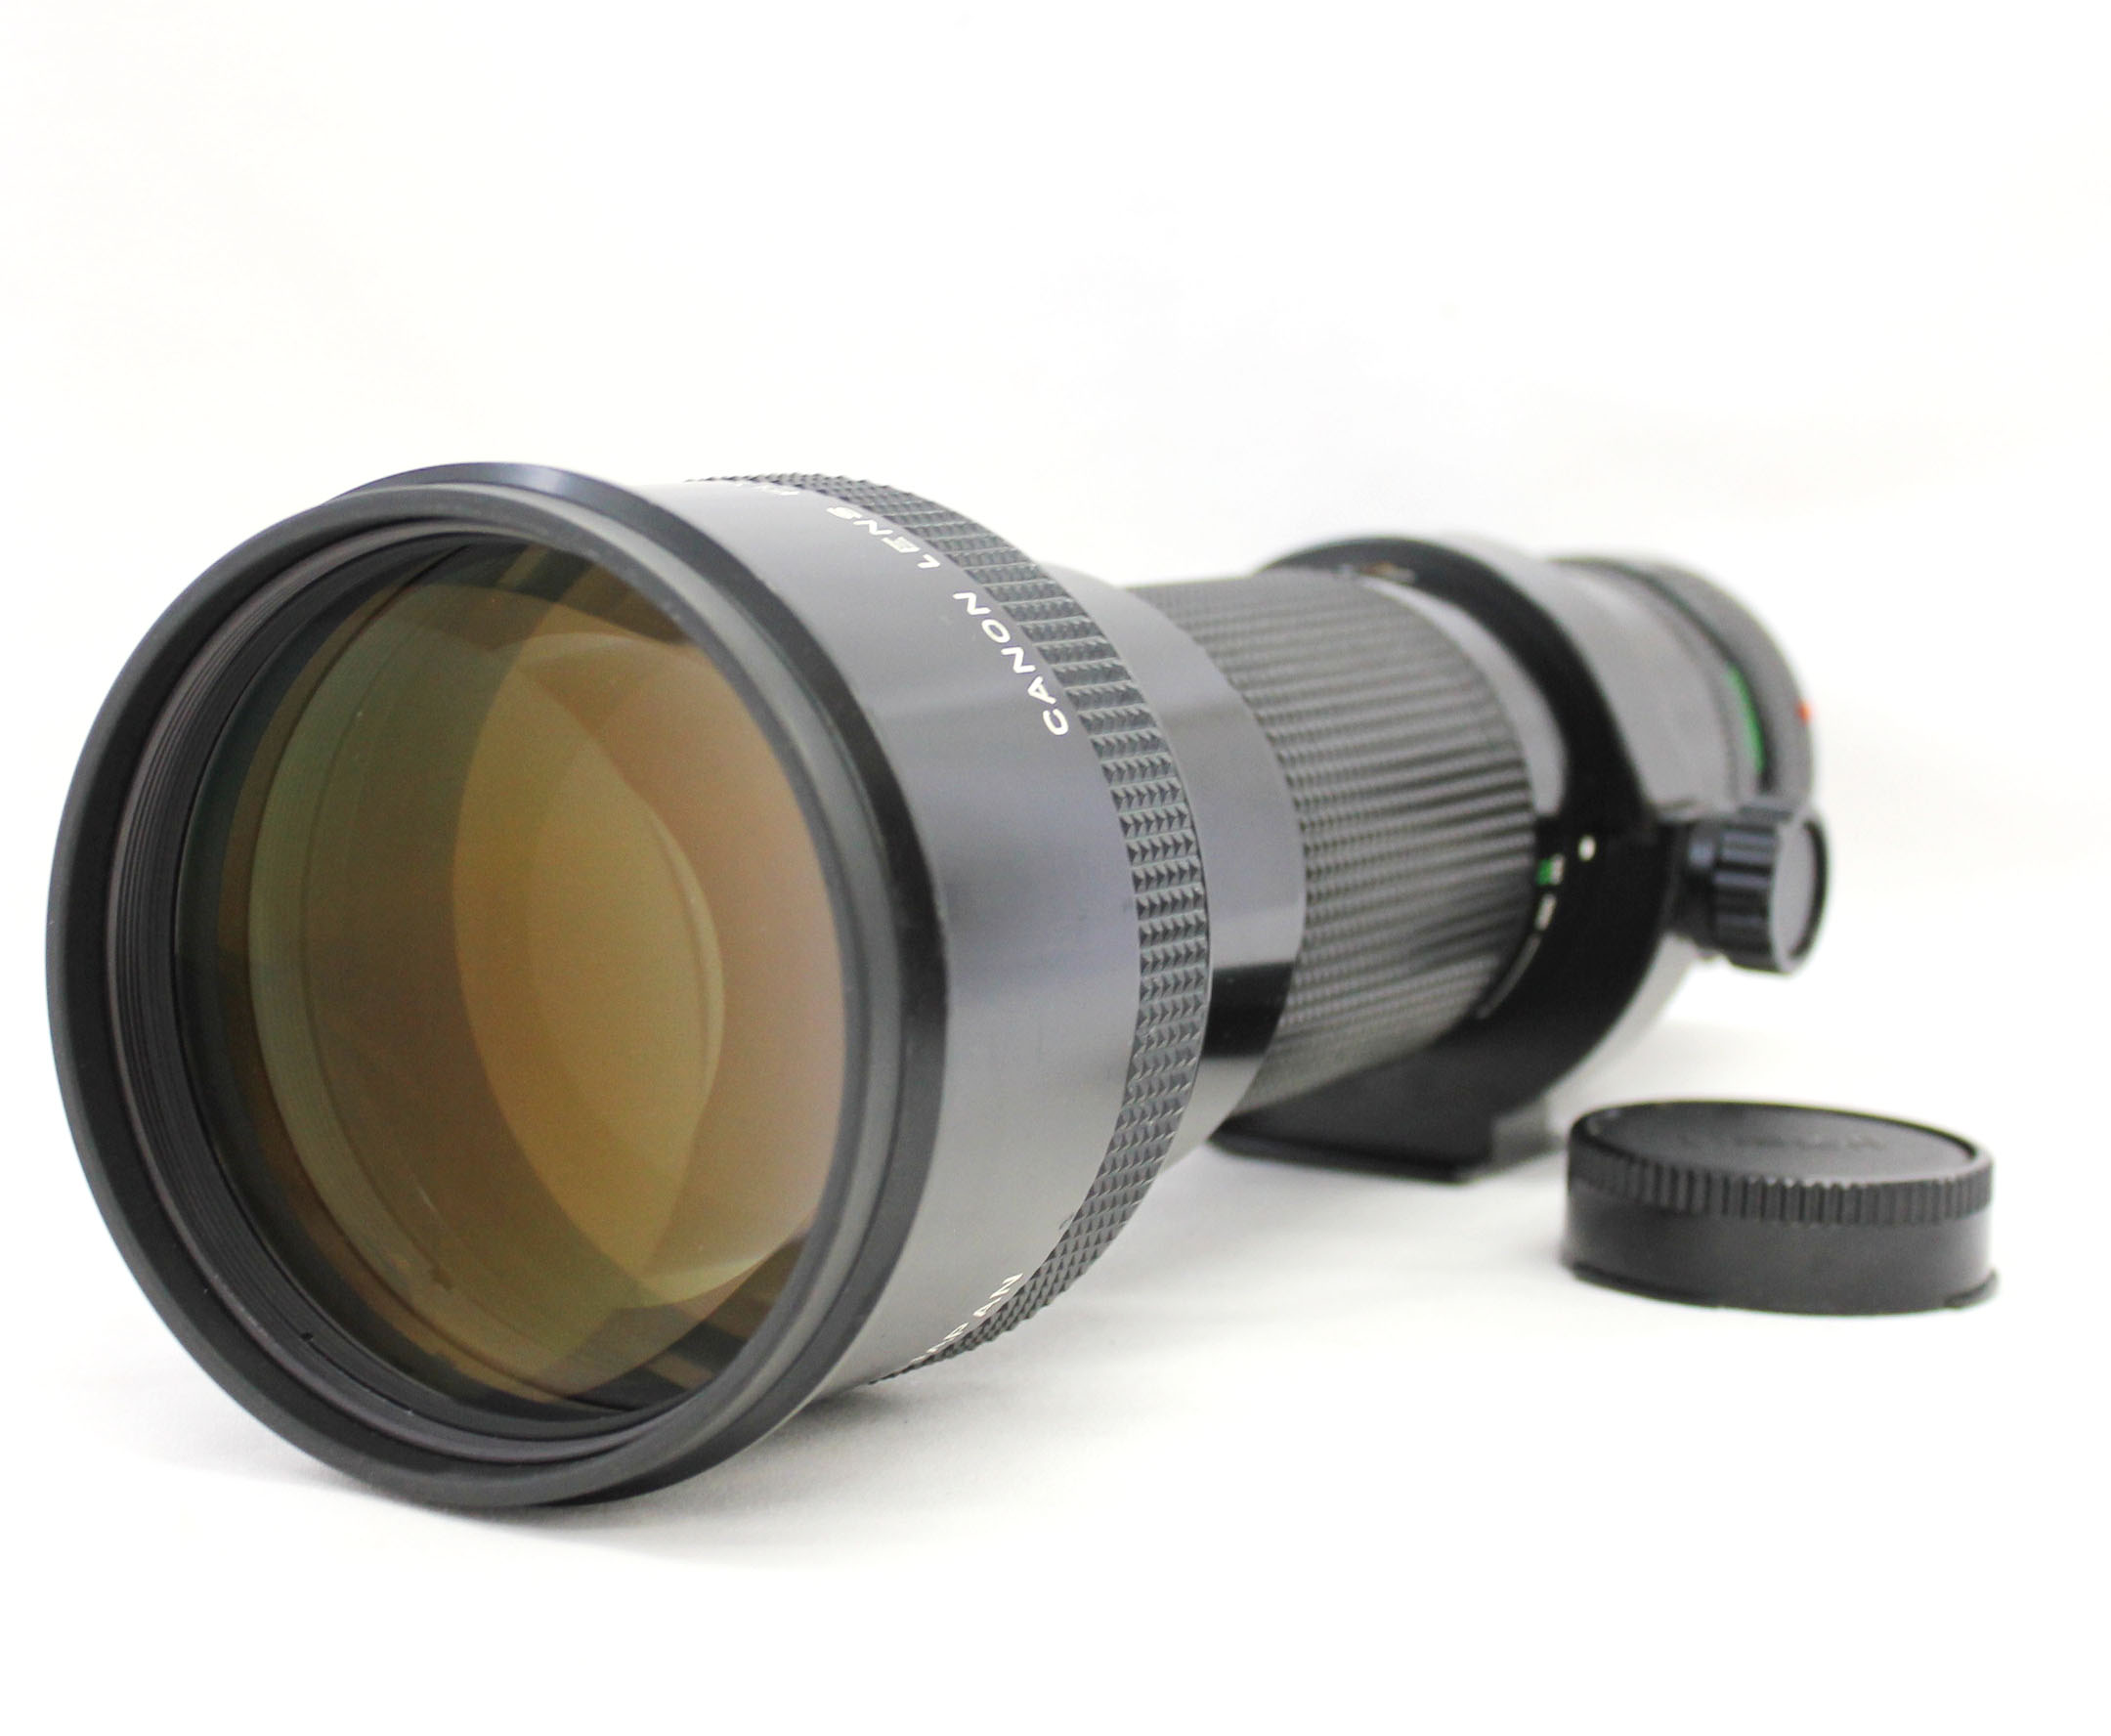  Canon New FD NFD 400mm F/4.5 MF Telephoto Lens from Japan Photo 0